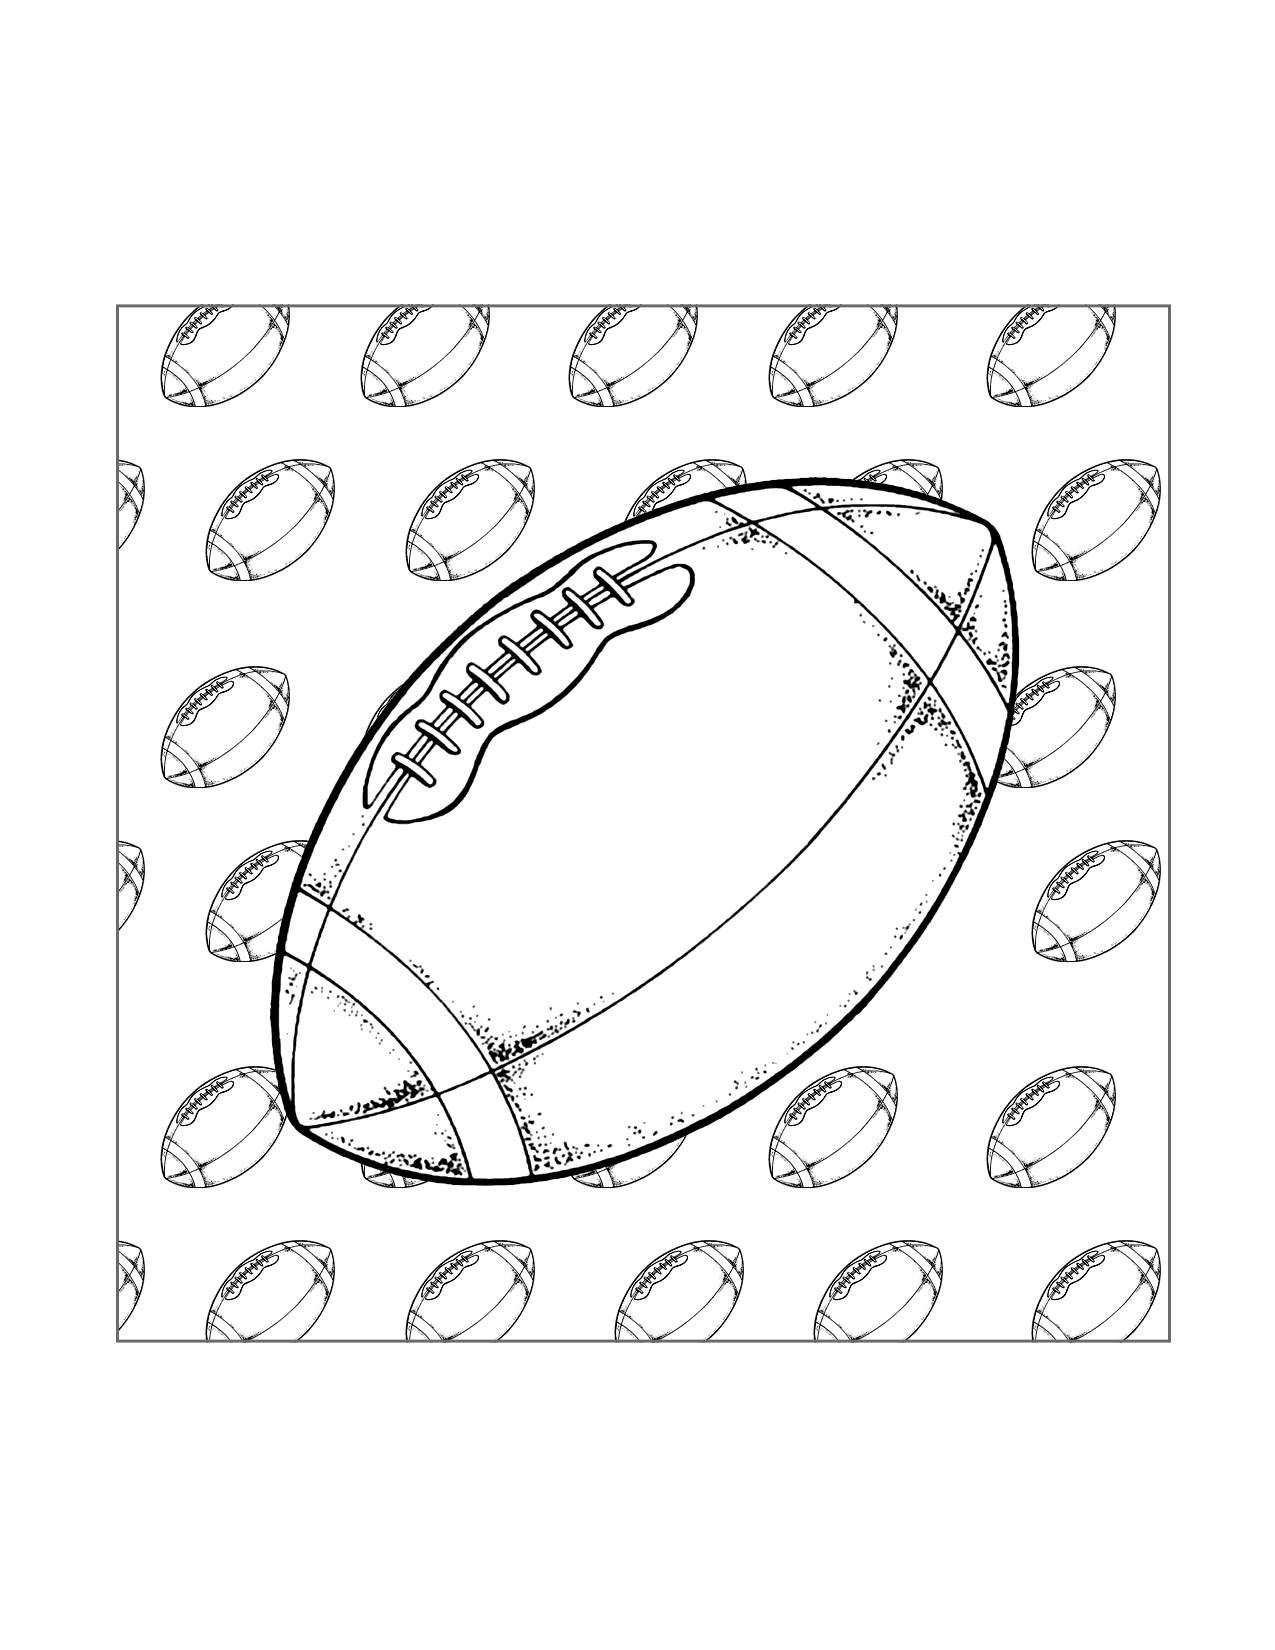 American Football Pattern Coloring Page